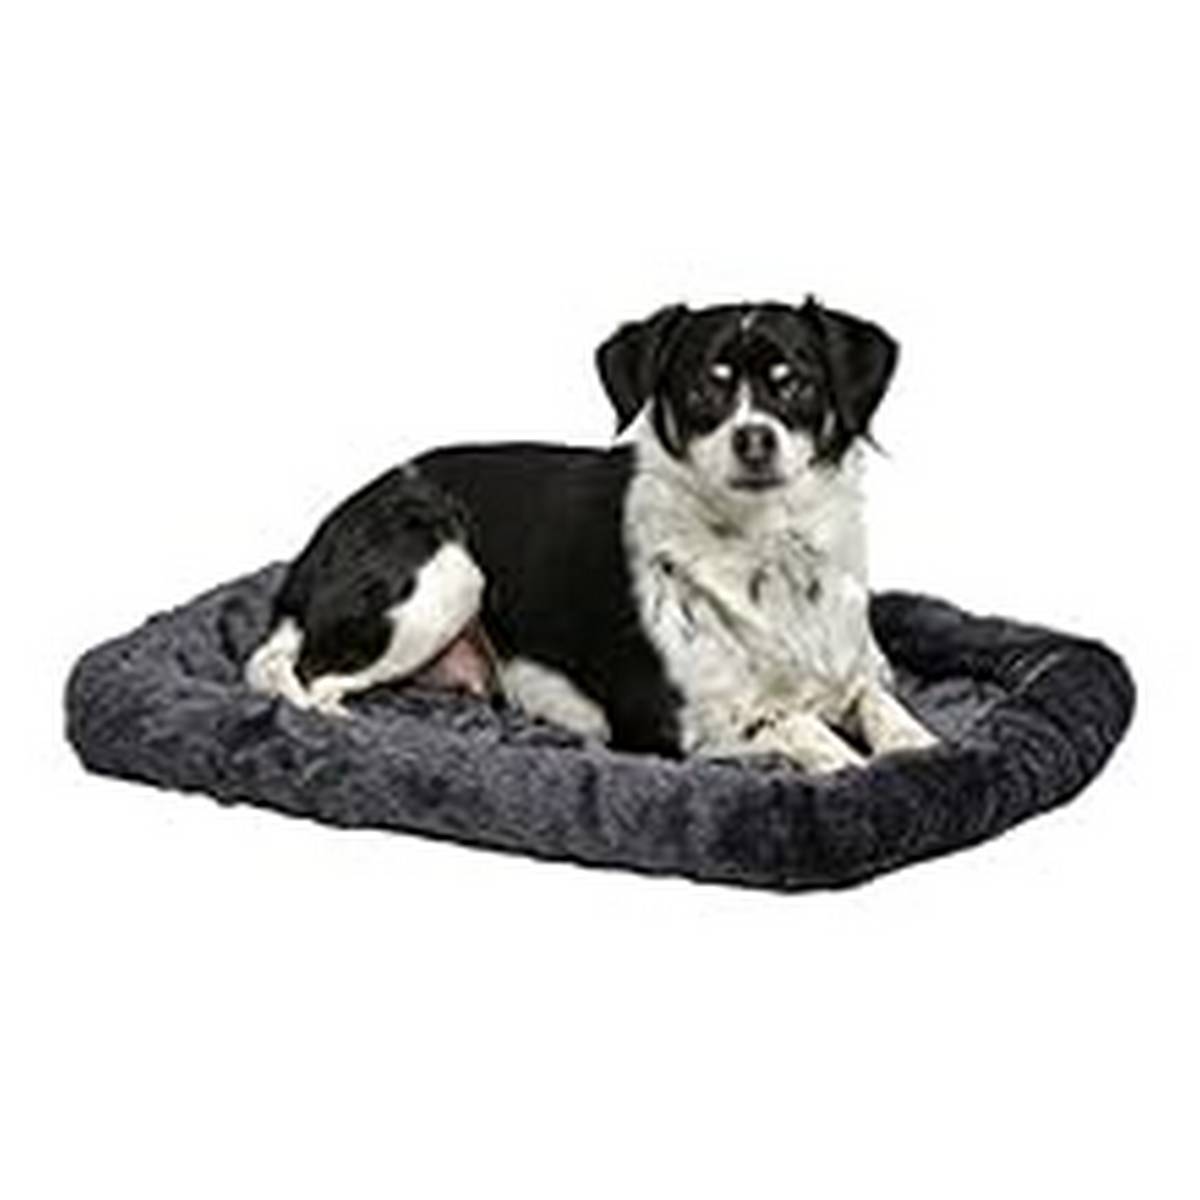 Supplies_MidWest Homes for Pets Bolster Dog Bed L-Inch Gray Dog Bed or Cat Bed w Comfortable Bolster Ideal for Small Dog Breeds & Fits a -Inch Dog Crate Easy Maintenance Machine Wa